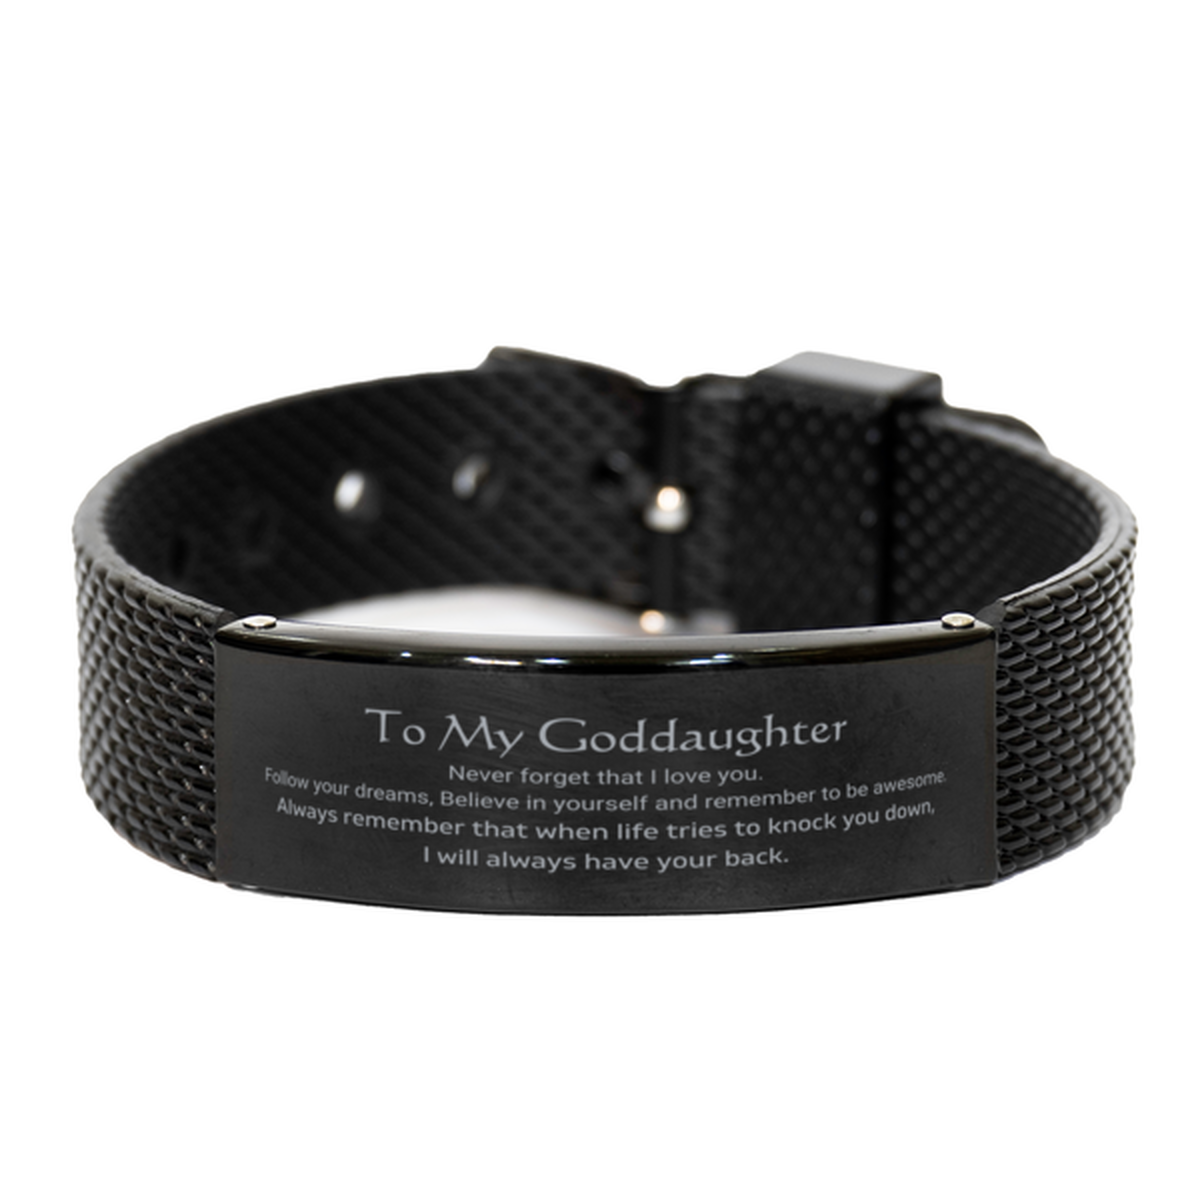 Inspirational Gifts for Goddaughter, Follow your dreams, Believe in yourself, Goddaughter Black Shark Mesh Bracelet, Birthday Christmas Unique Gifts For Goddaughter